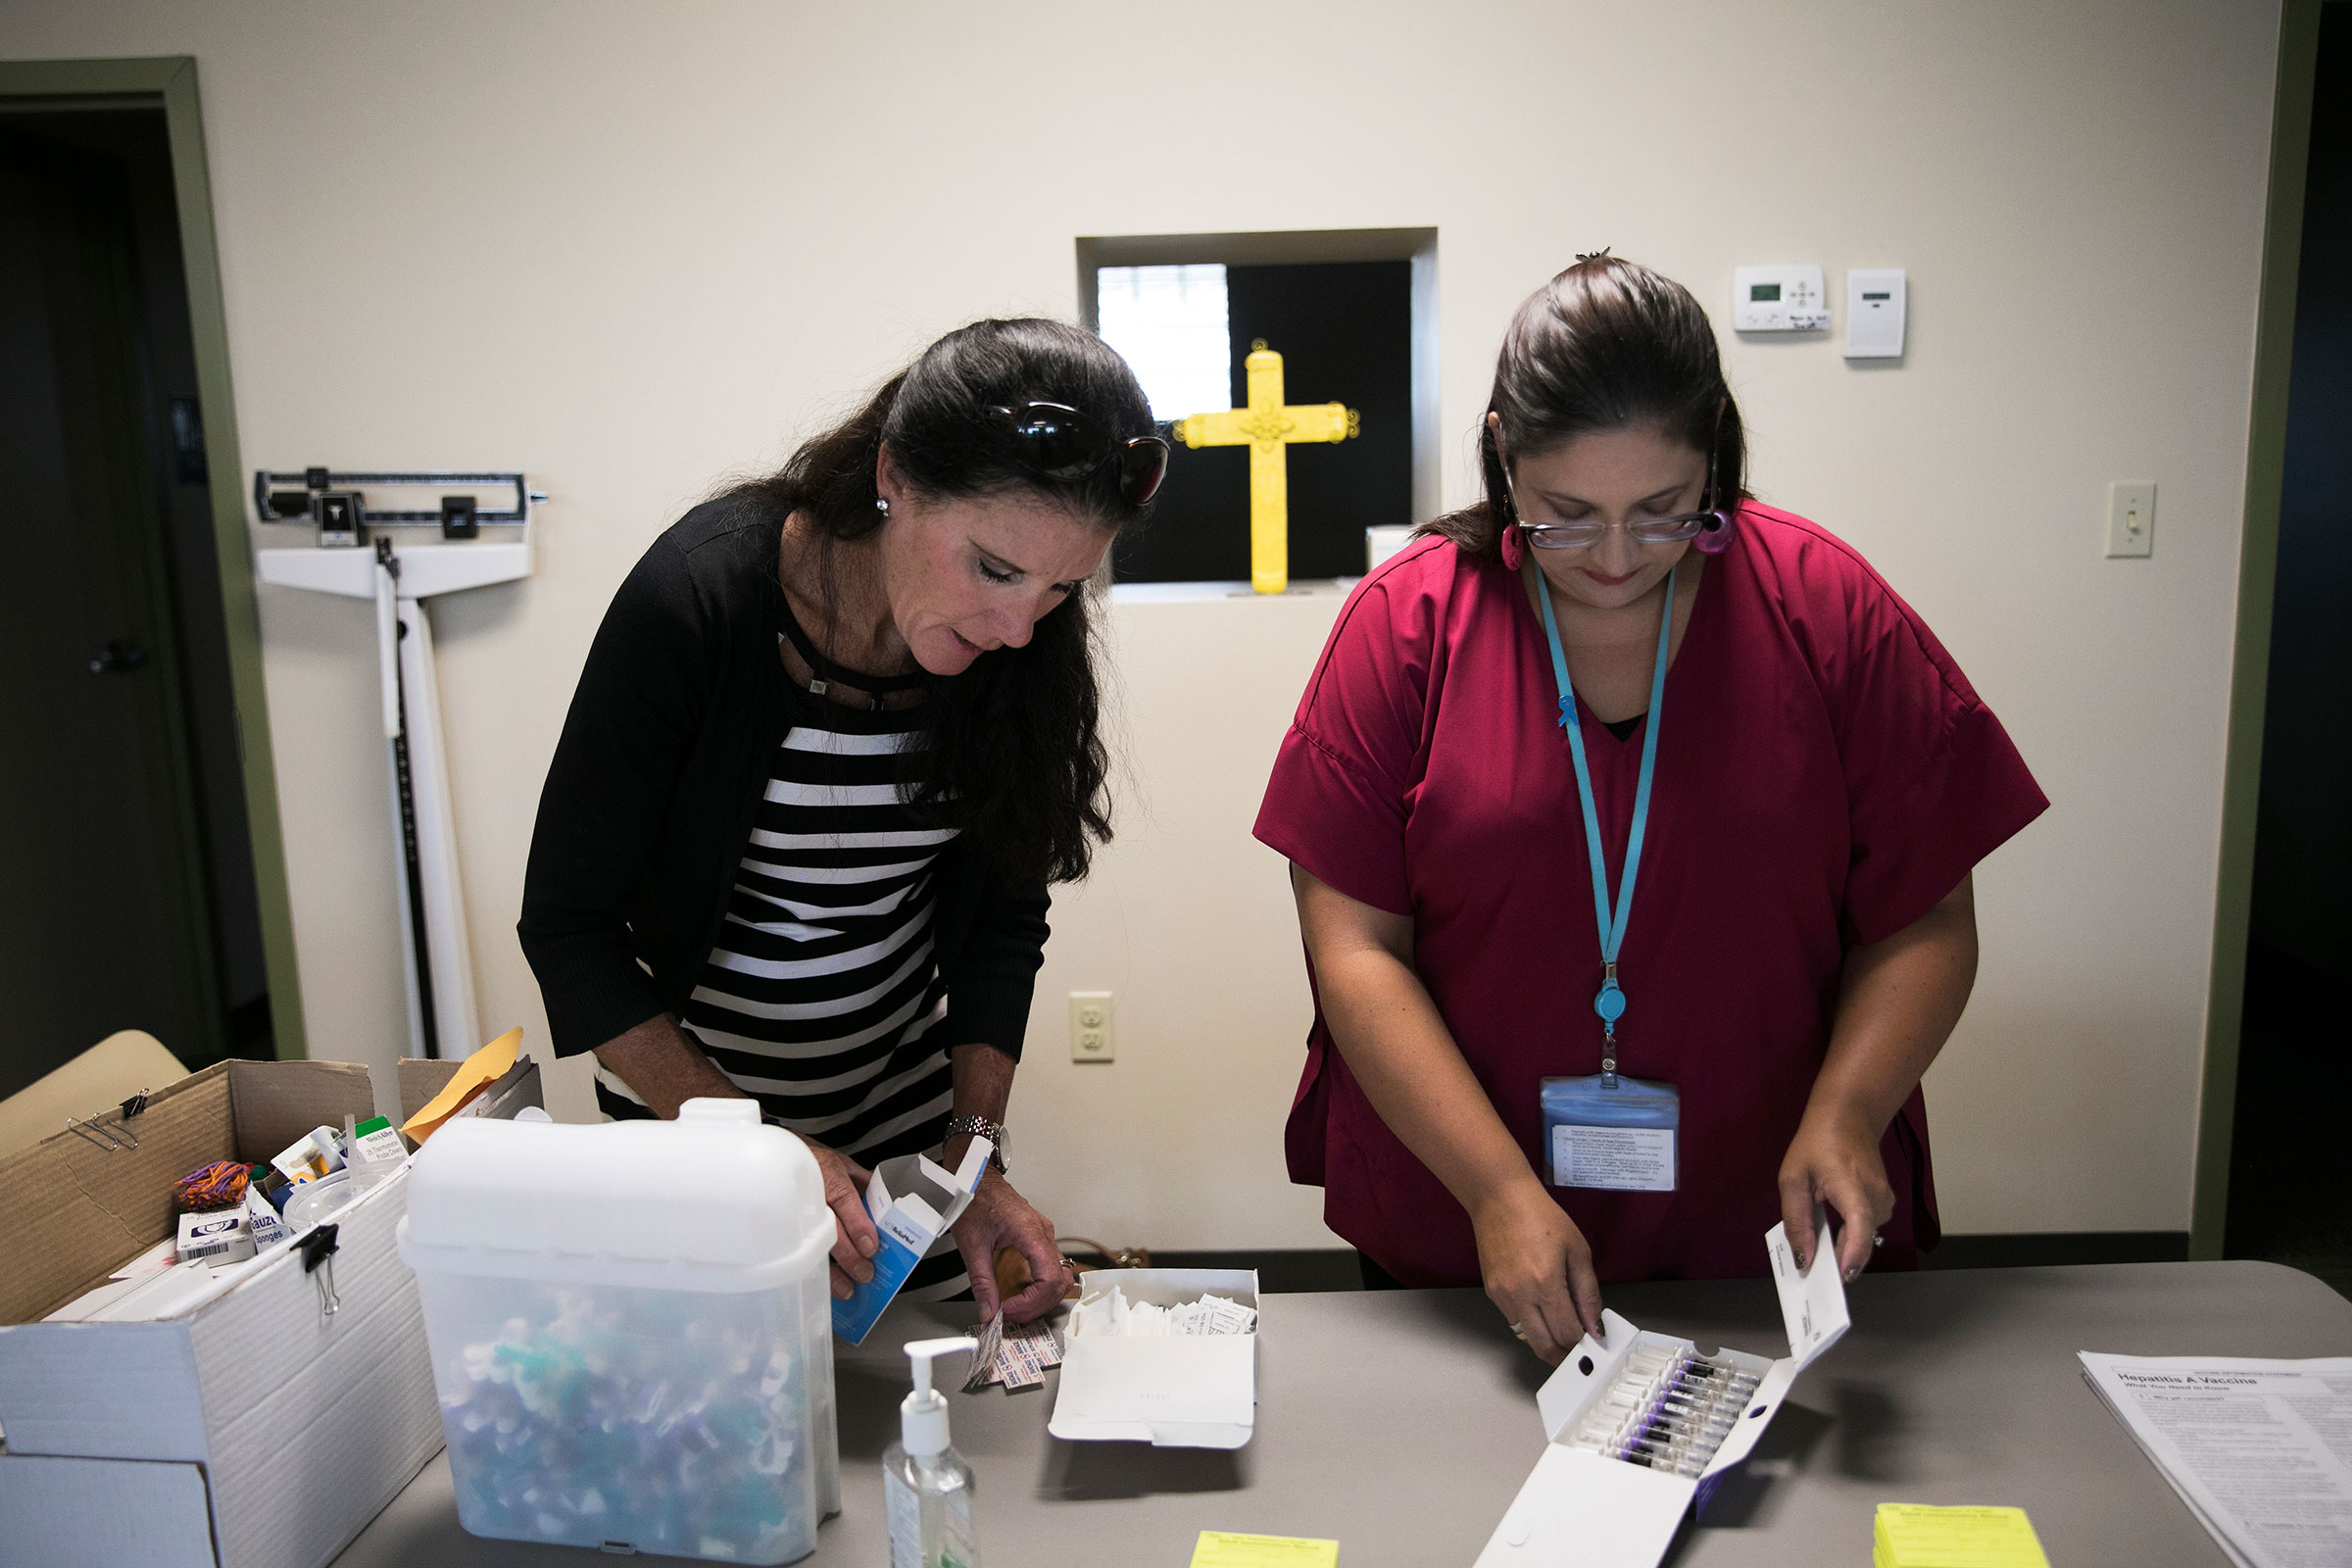 Summit County Public Health nurse Rachel Flossie (left) and communicable disease supervisor Tracy Rodriguez prepare to give vaccinations to clients during a South Street Ministries program in Akron, Ohio, last month. In the wake of the opioid crisis, the highly communicable hepatitis A virus is spreading in more than half the states, including Ohio. “It’s getting into the general public,” Rodriguez says. “It’s scary.”